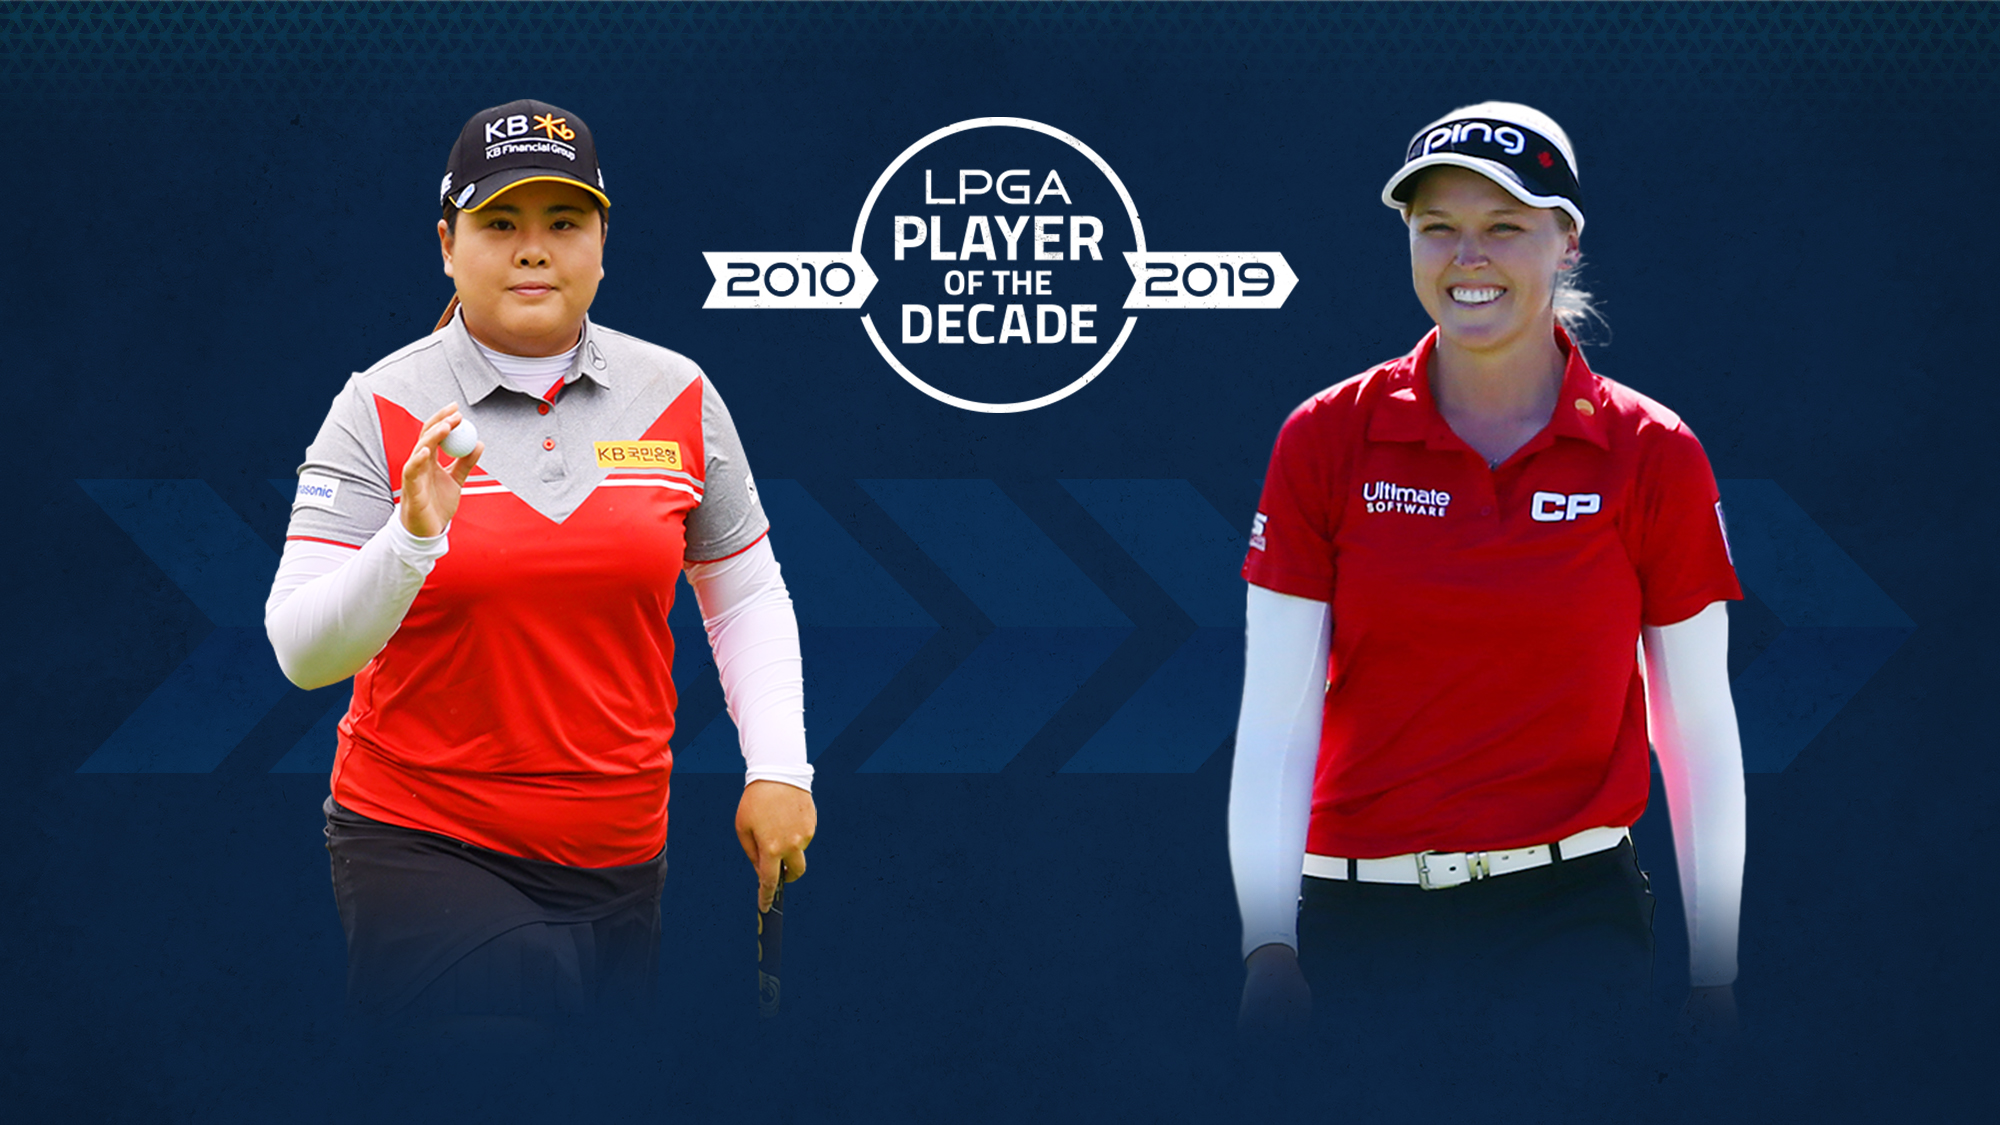 Park and Henderson Square Off For LPGA Player of the Decade LPGA